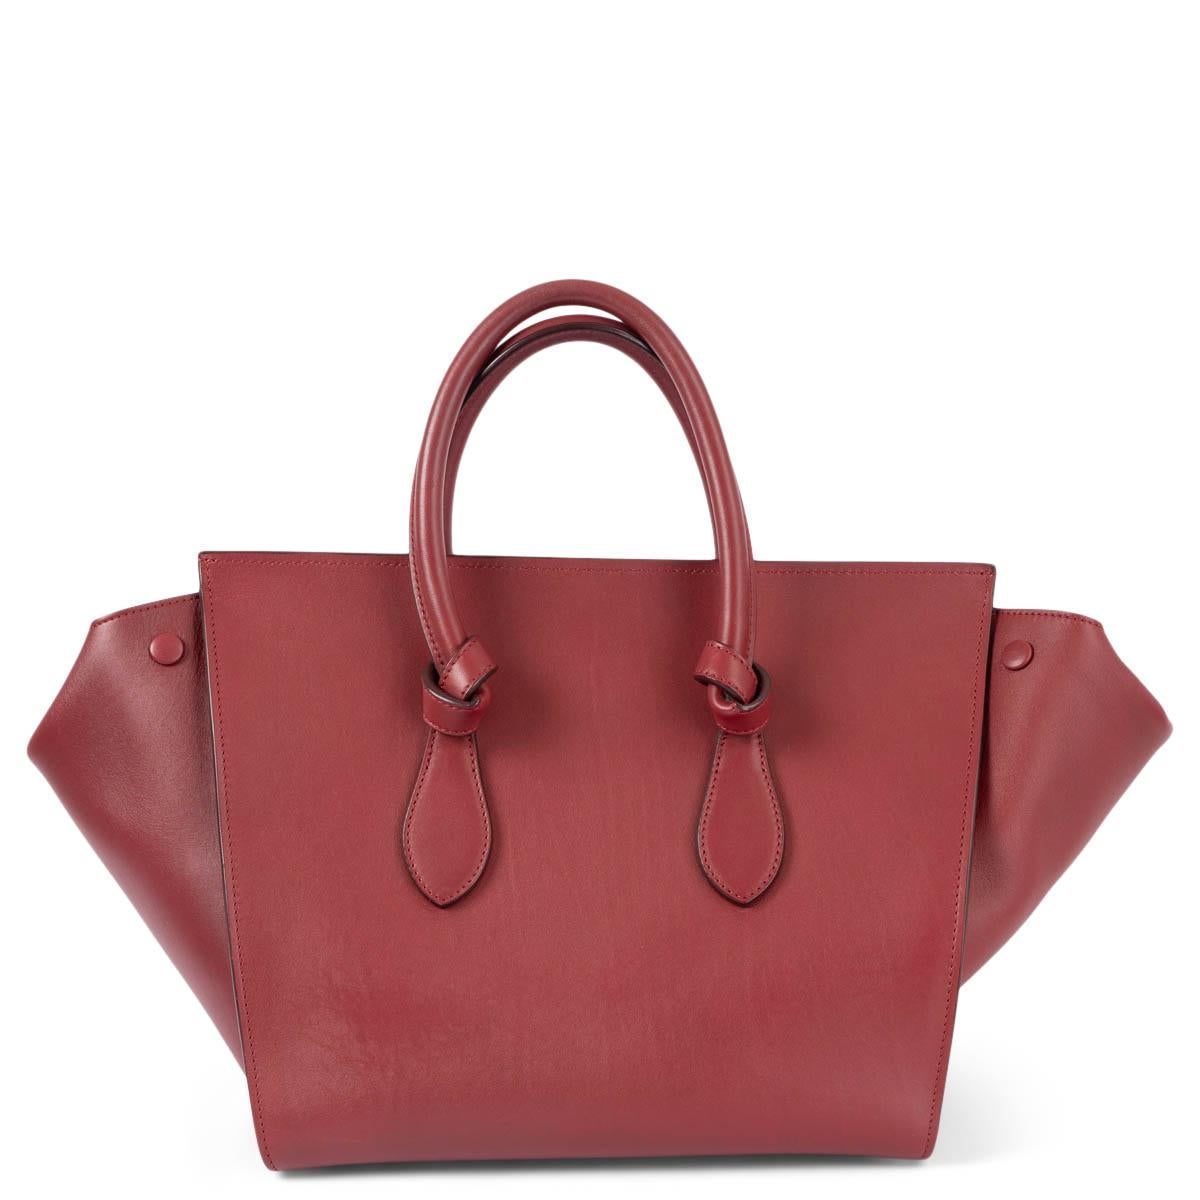 Brown CELINE burgundy leather SMALL TIE Tote Bag For Sale